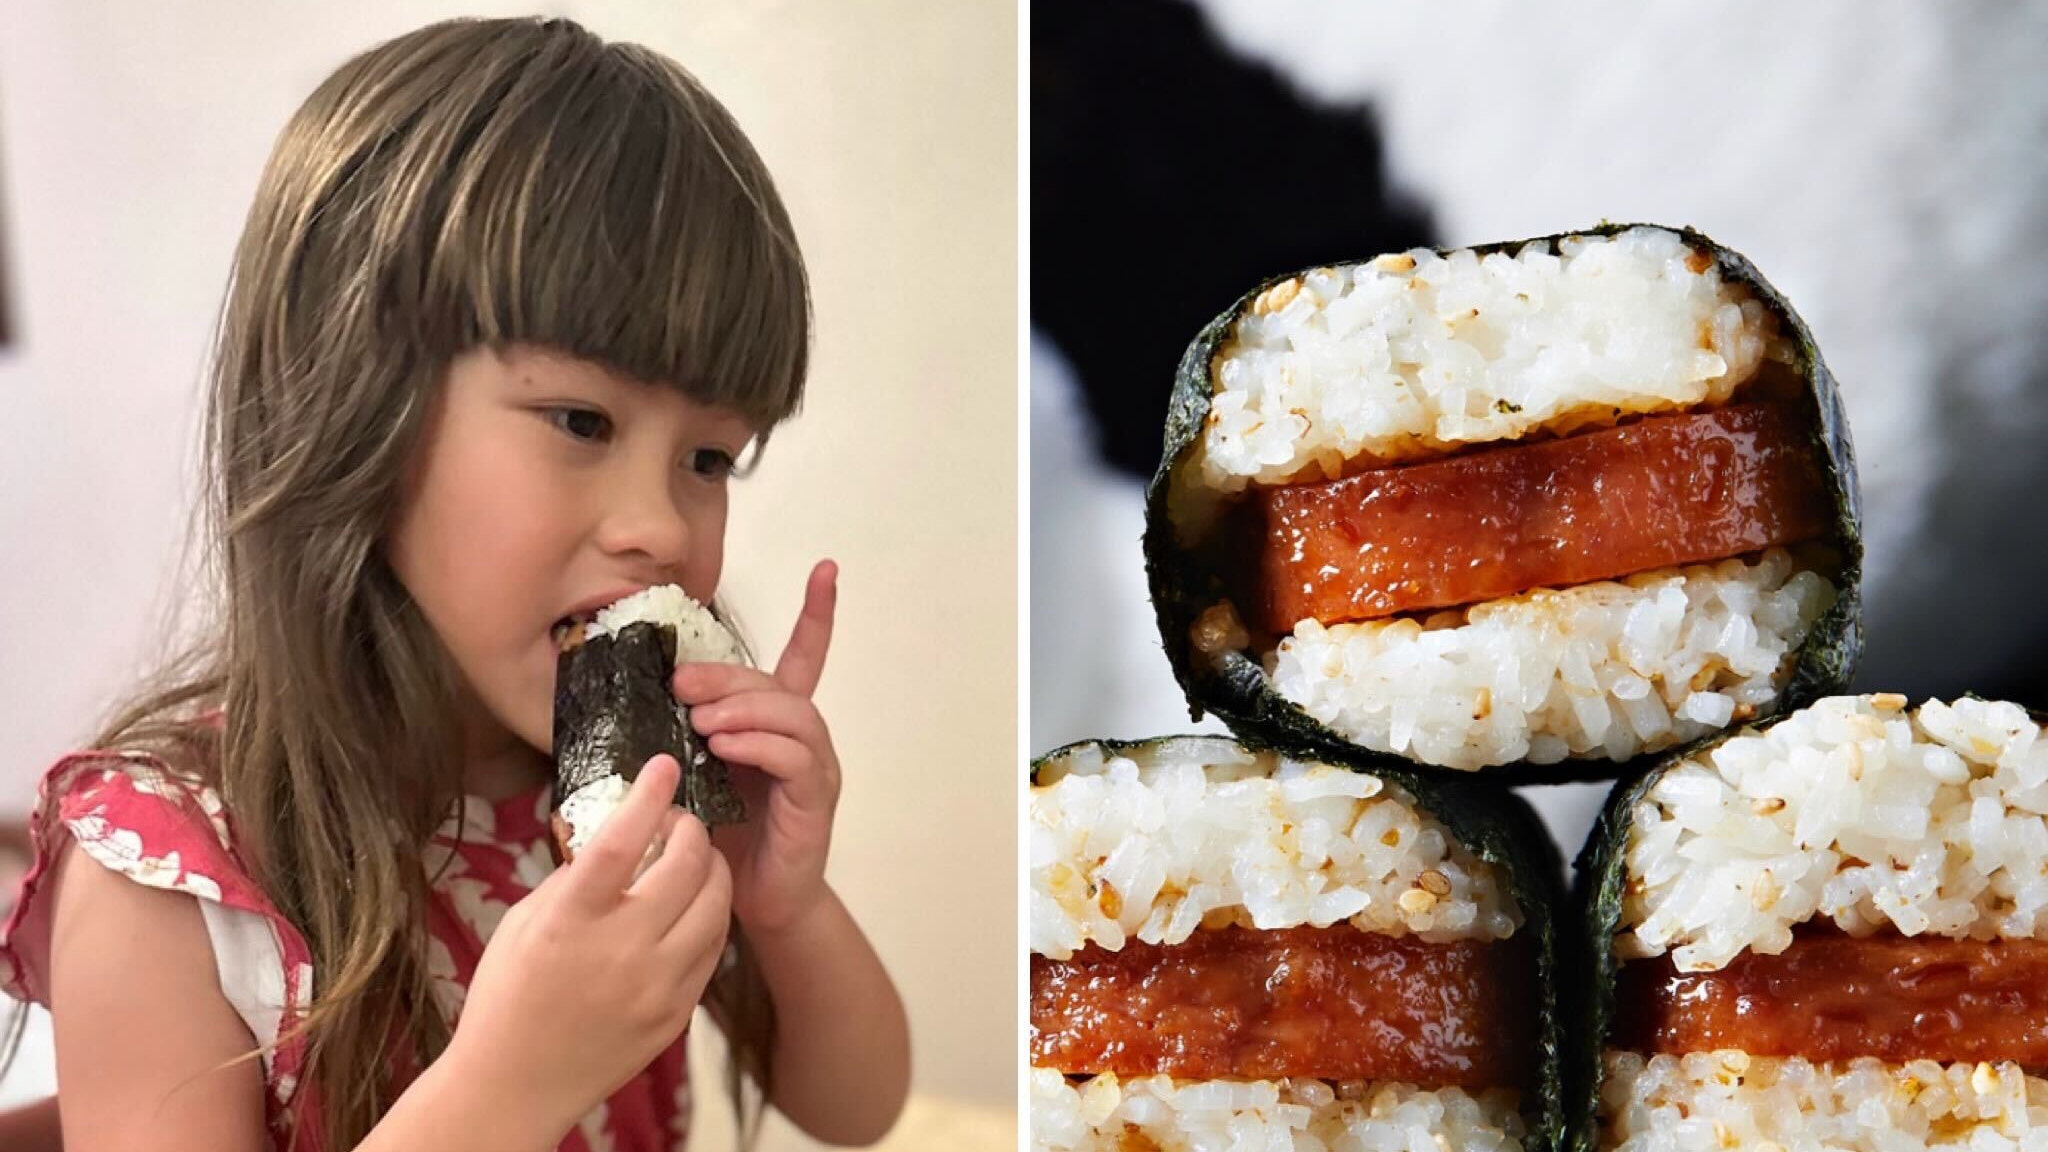 Spam is sizzling: Global favorite since World War II is at center of sushi craze